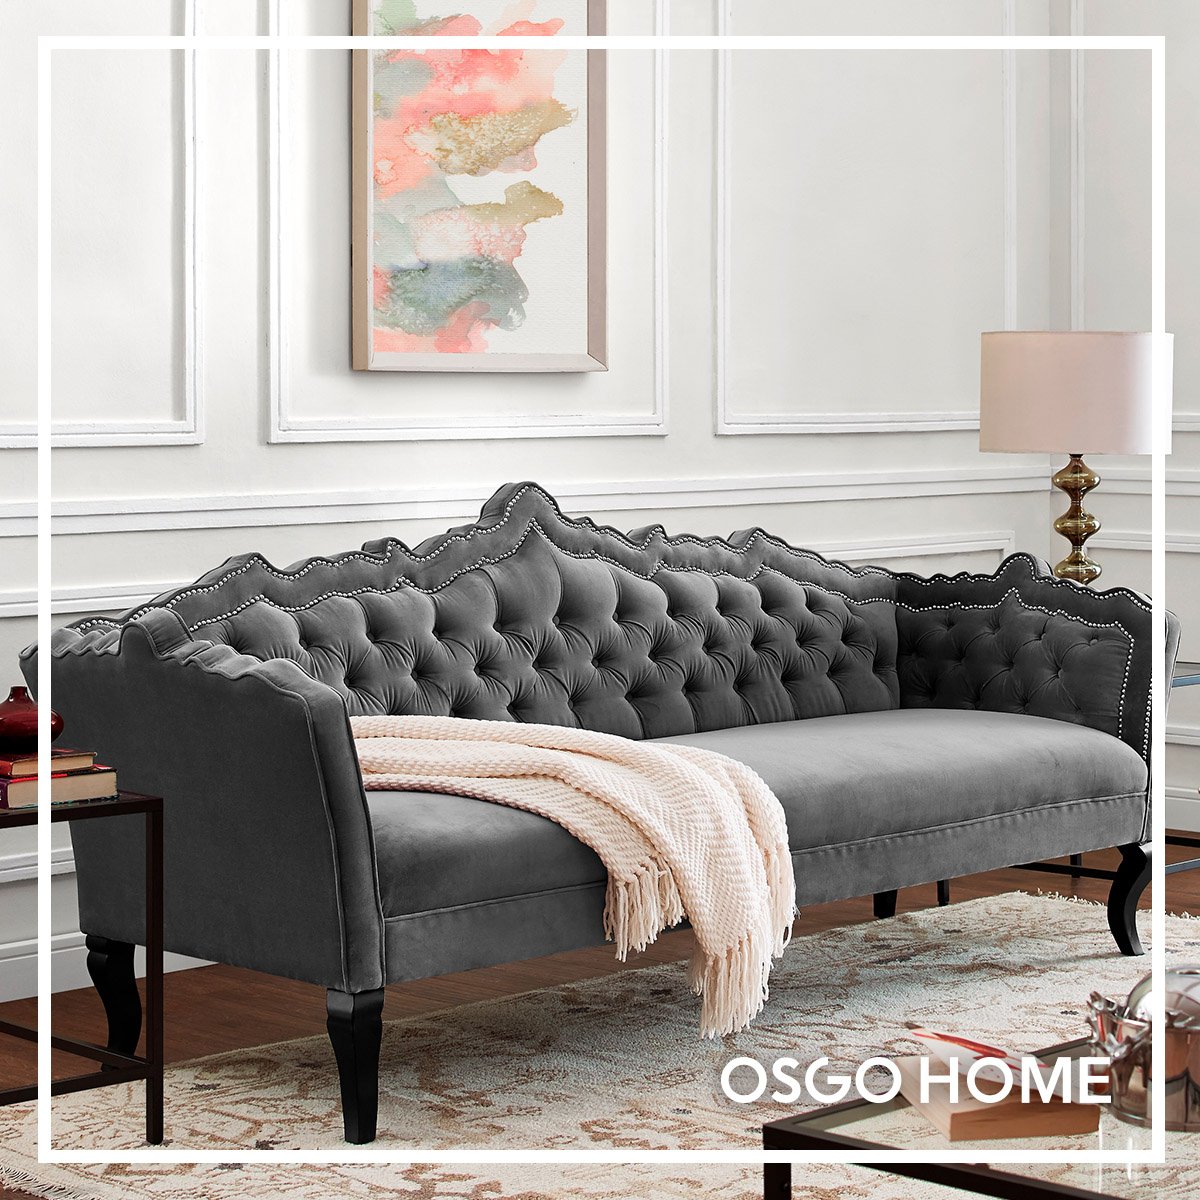 Osgo Home On Twitter Furnishing The Home Of Your Dreams